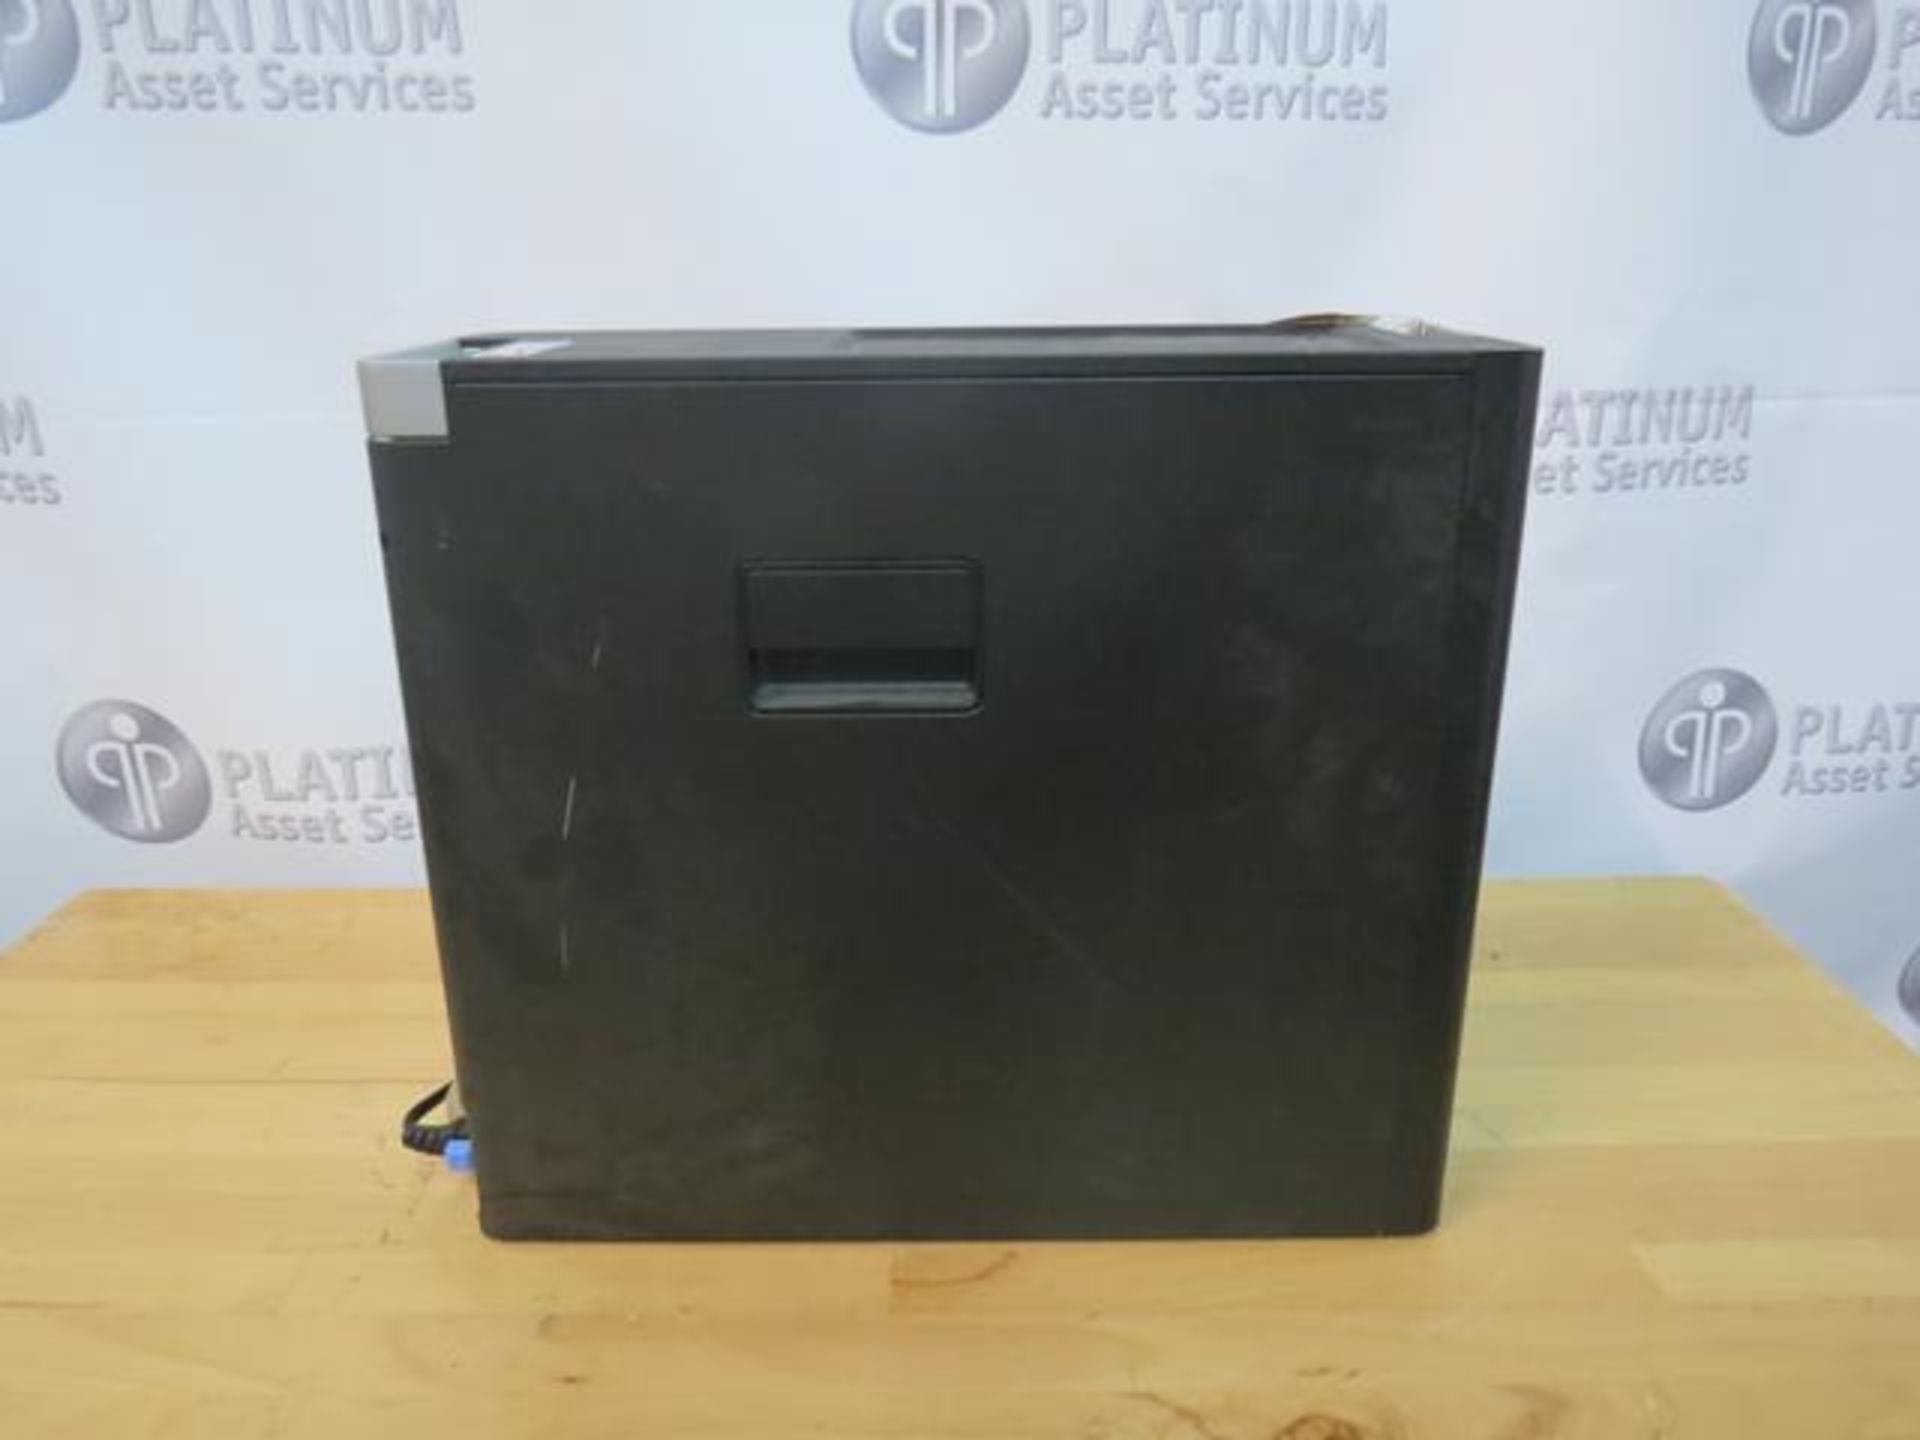 DELL, PRECISION T5600, DESKTOP WORKSTATION (UNIT DOES NOT BOOT UP) (TAG#105) - Image 3 of 5